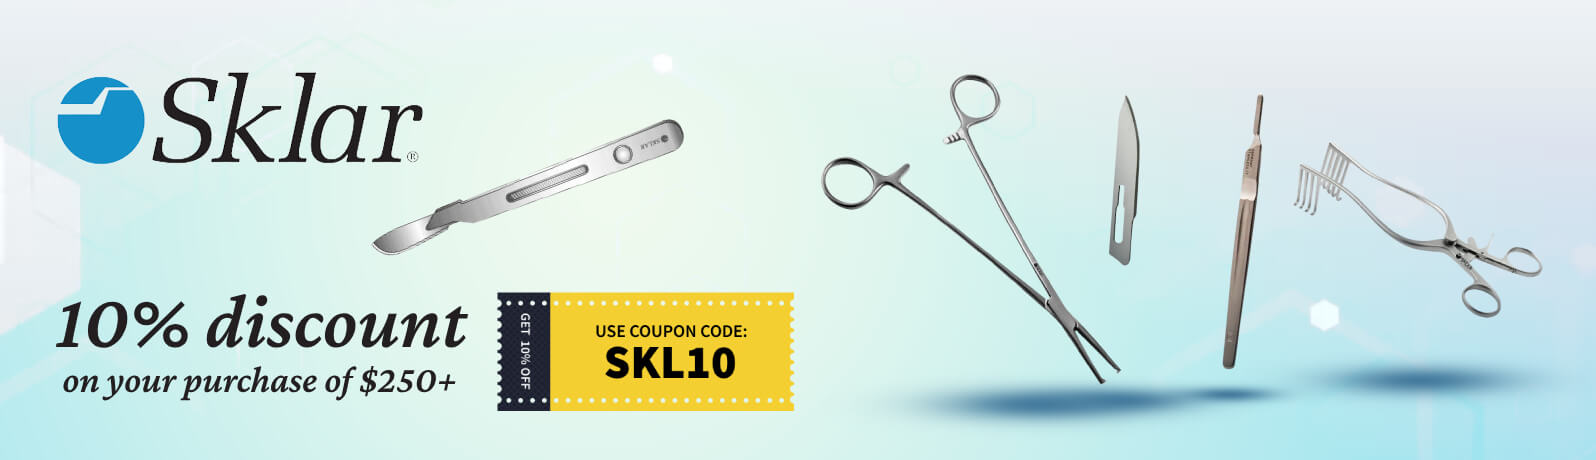 Get a 10% Discount On Your Purchase of Selected Sklar Products of $250 or more!